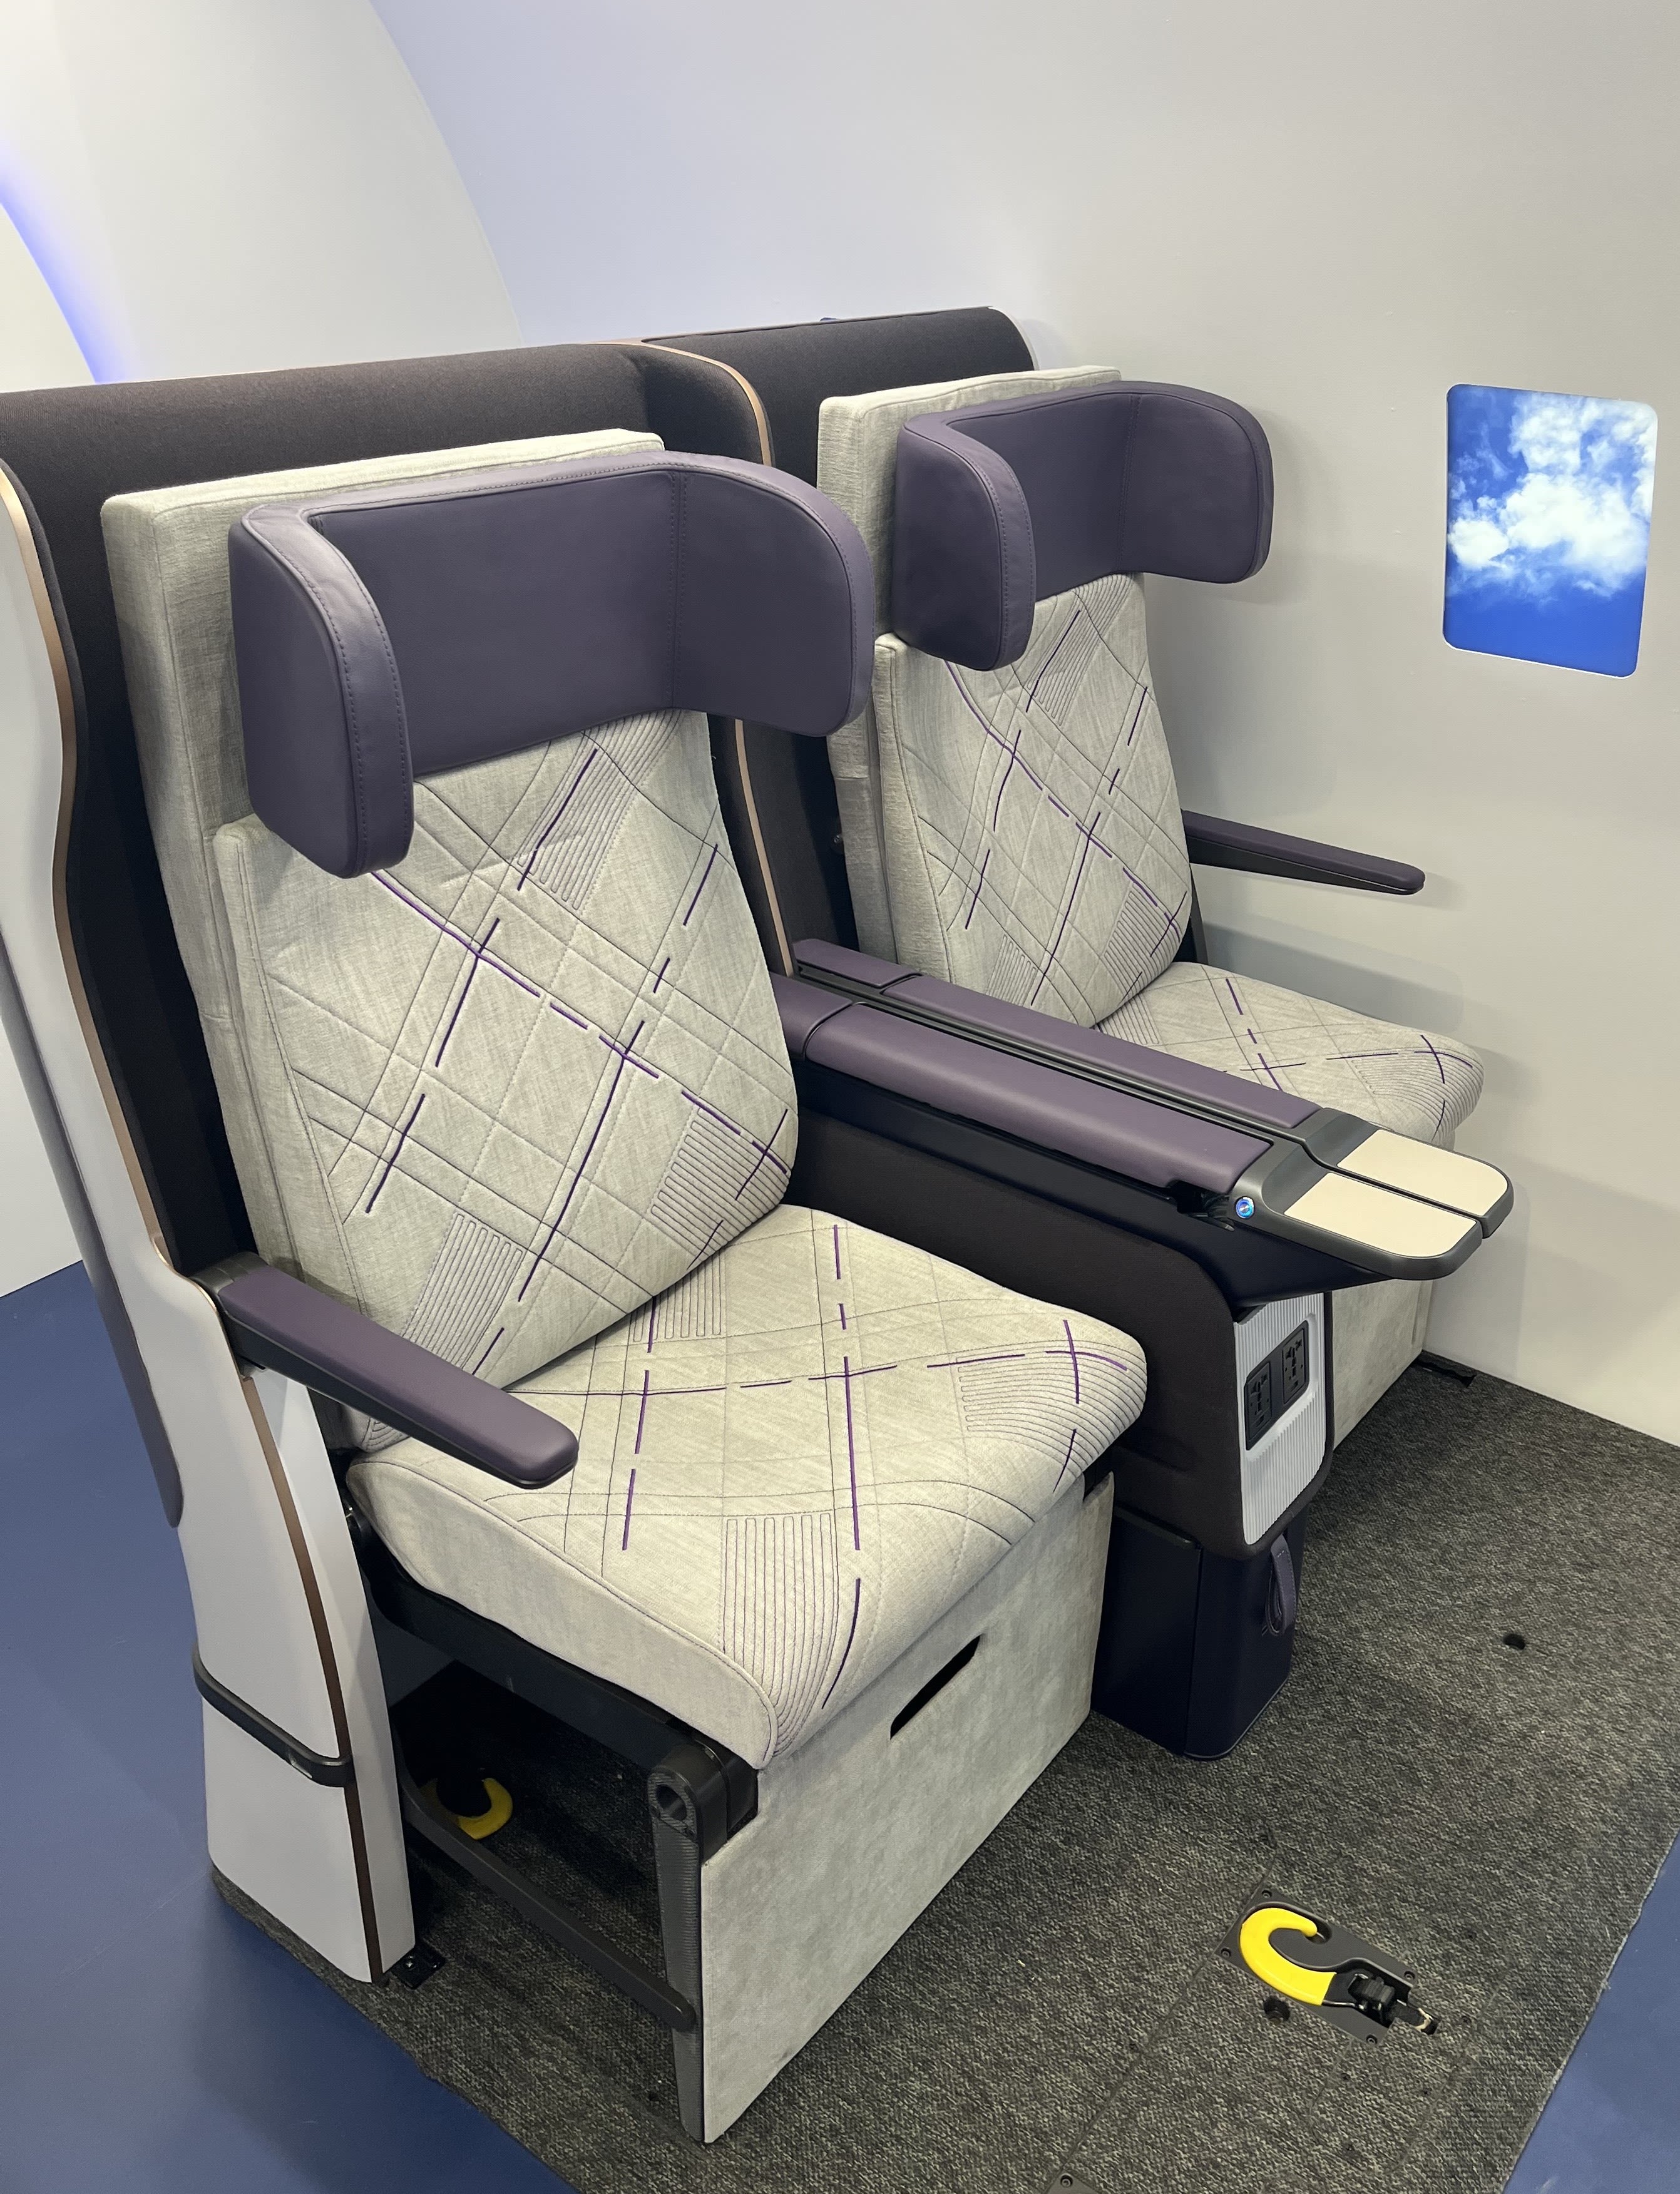 Unbelievably excited' - wheelchair users react to new Delta airplane seat  design